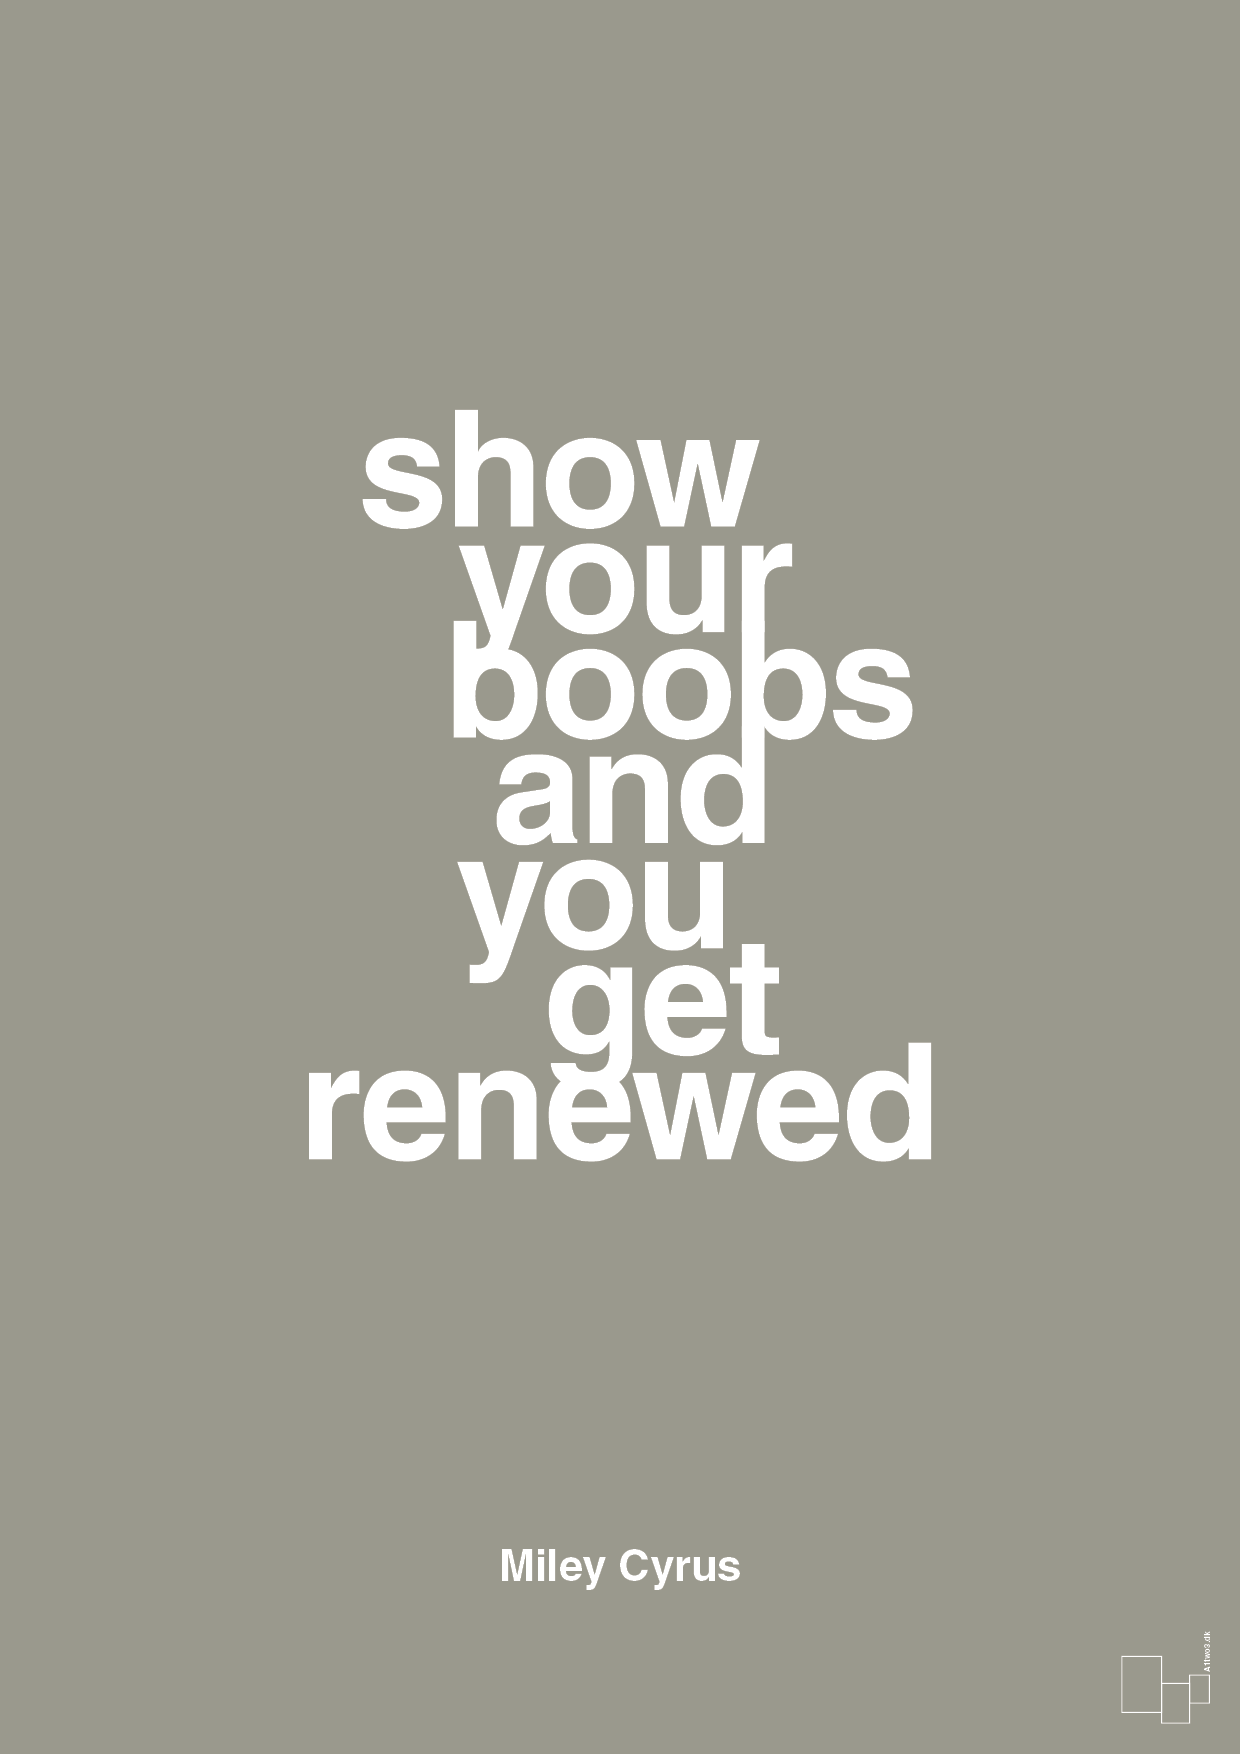 show your boobs and you get renewed - Plakat med Citater i Battleship Gray